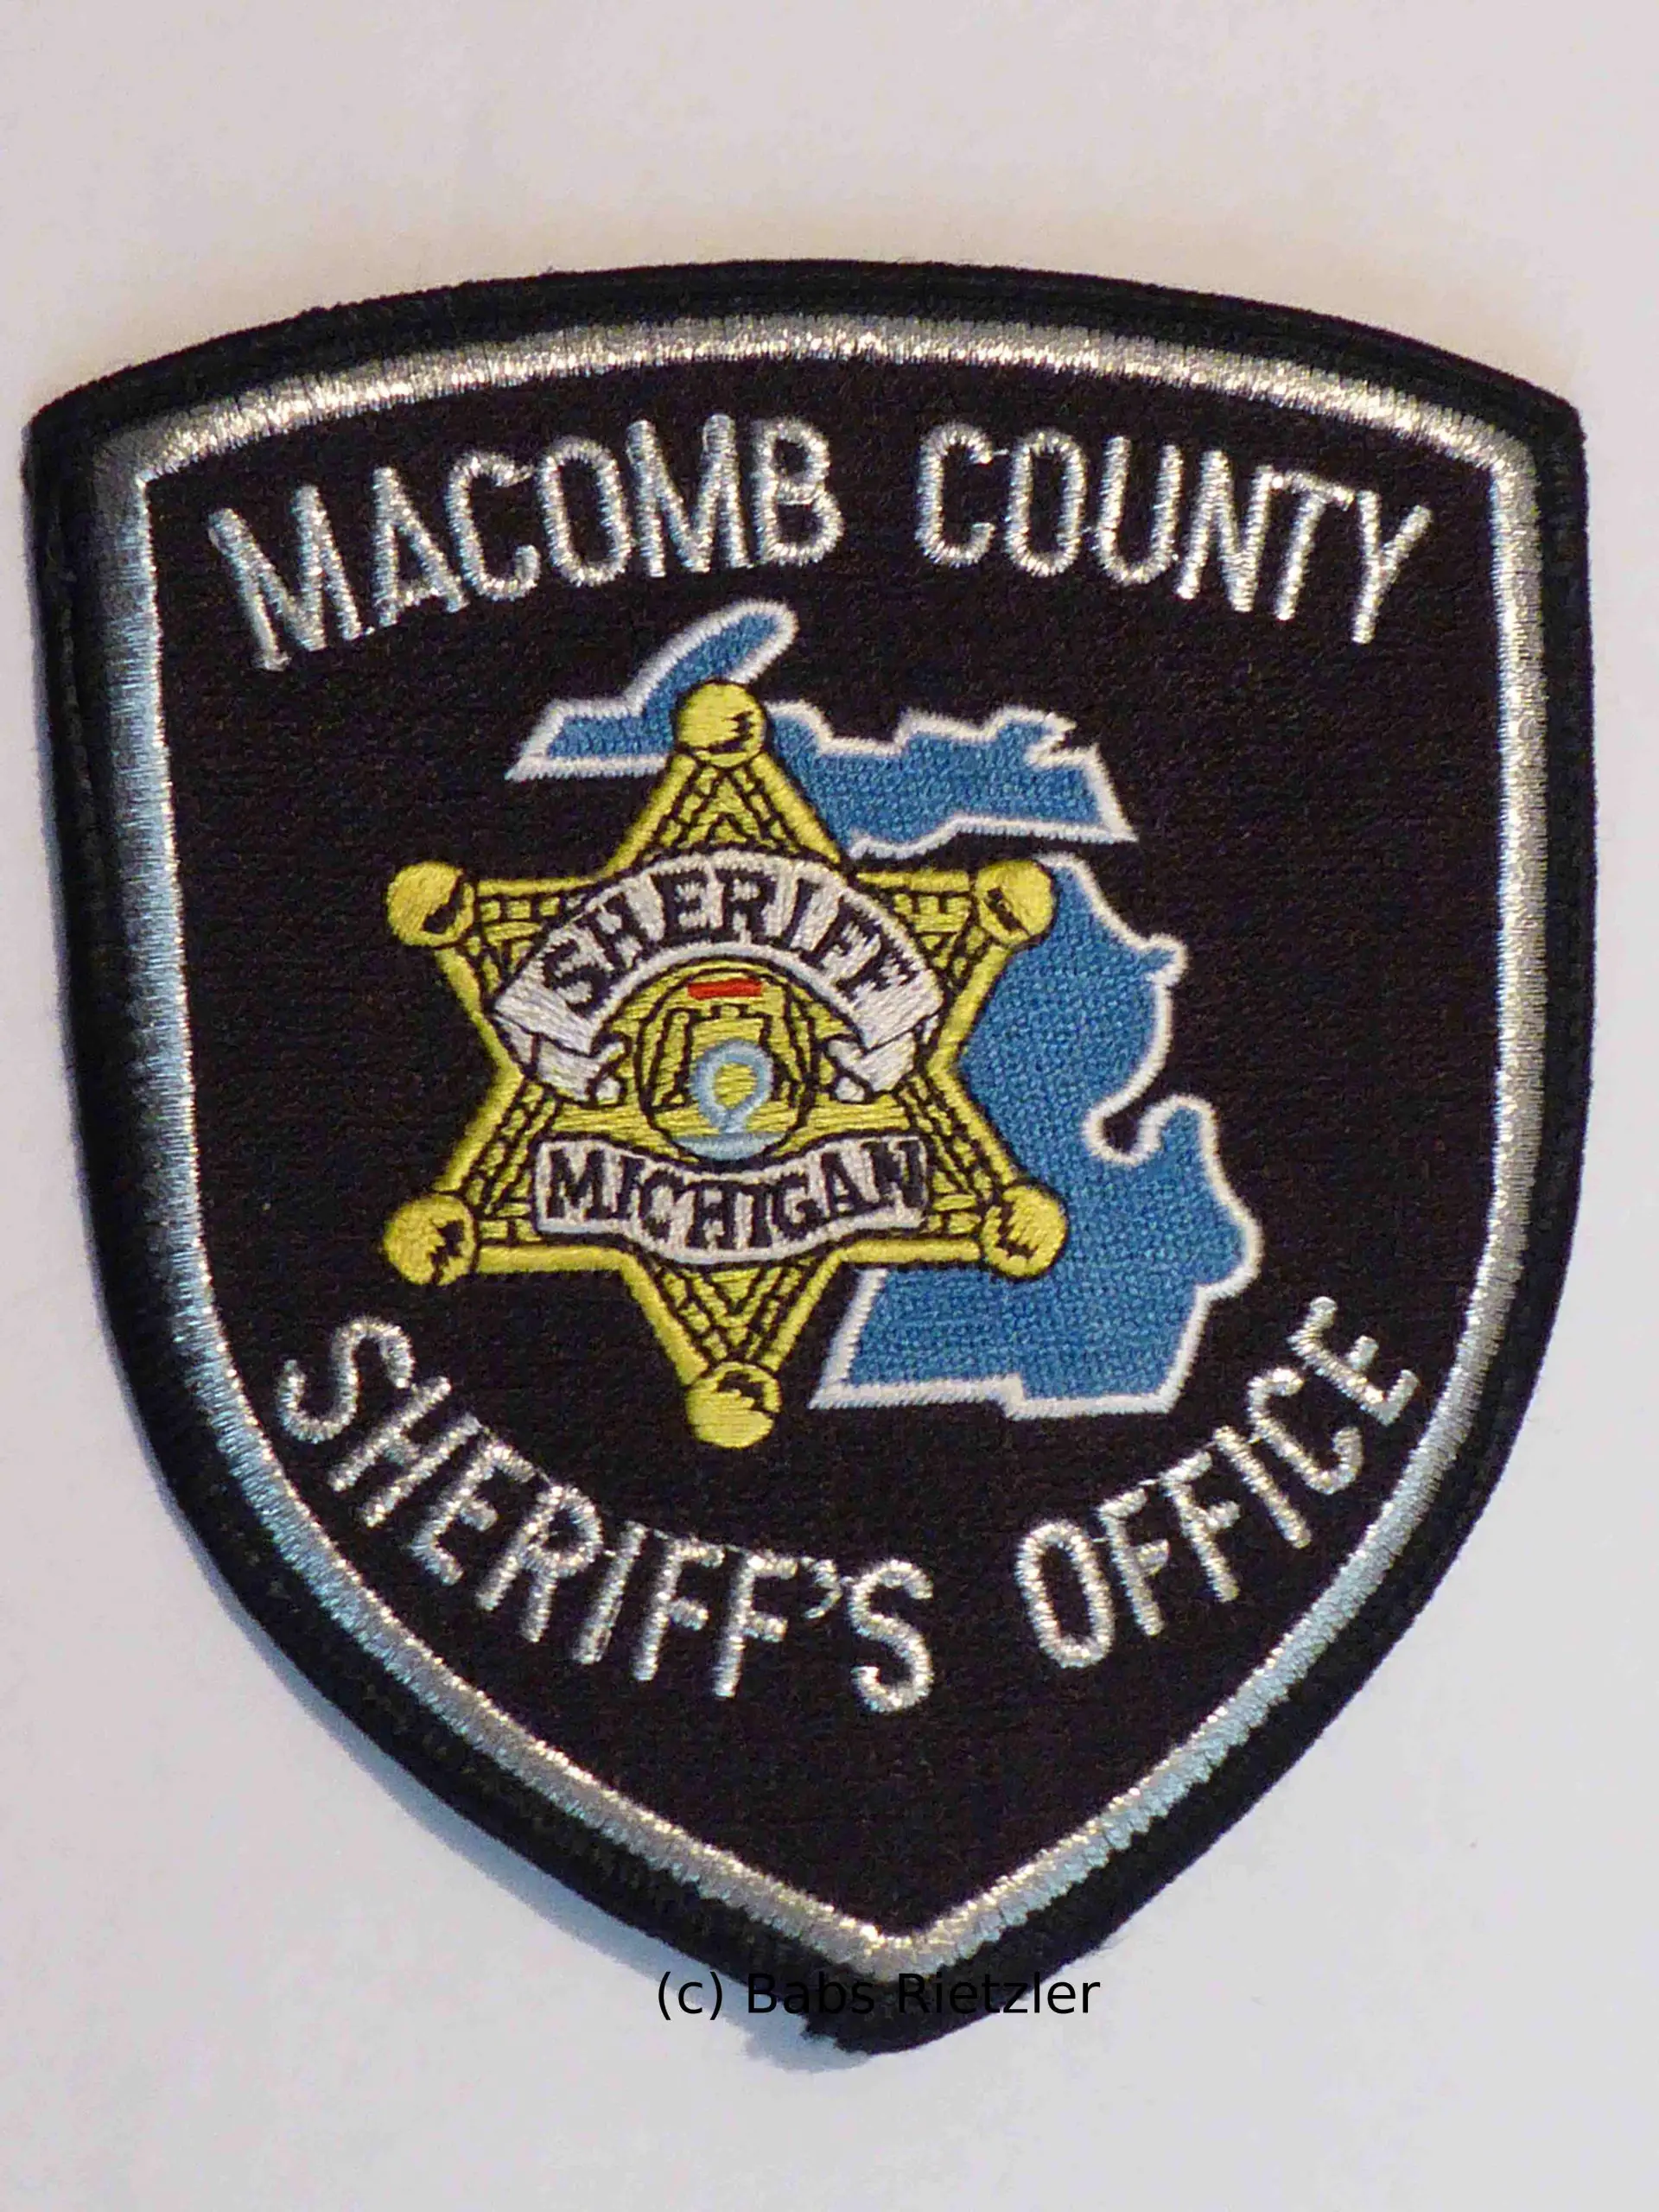 Sheriff and Police Patches